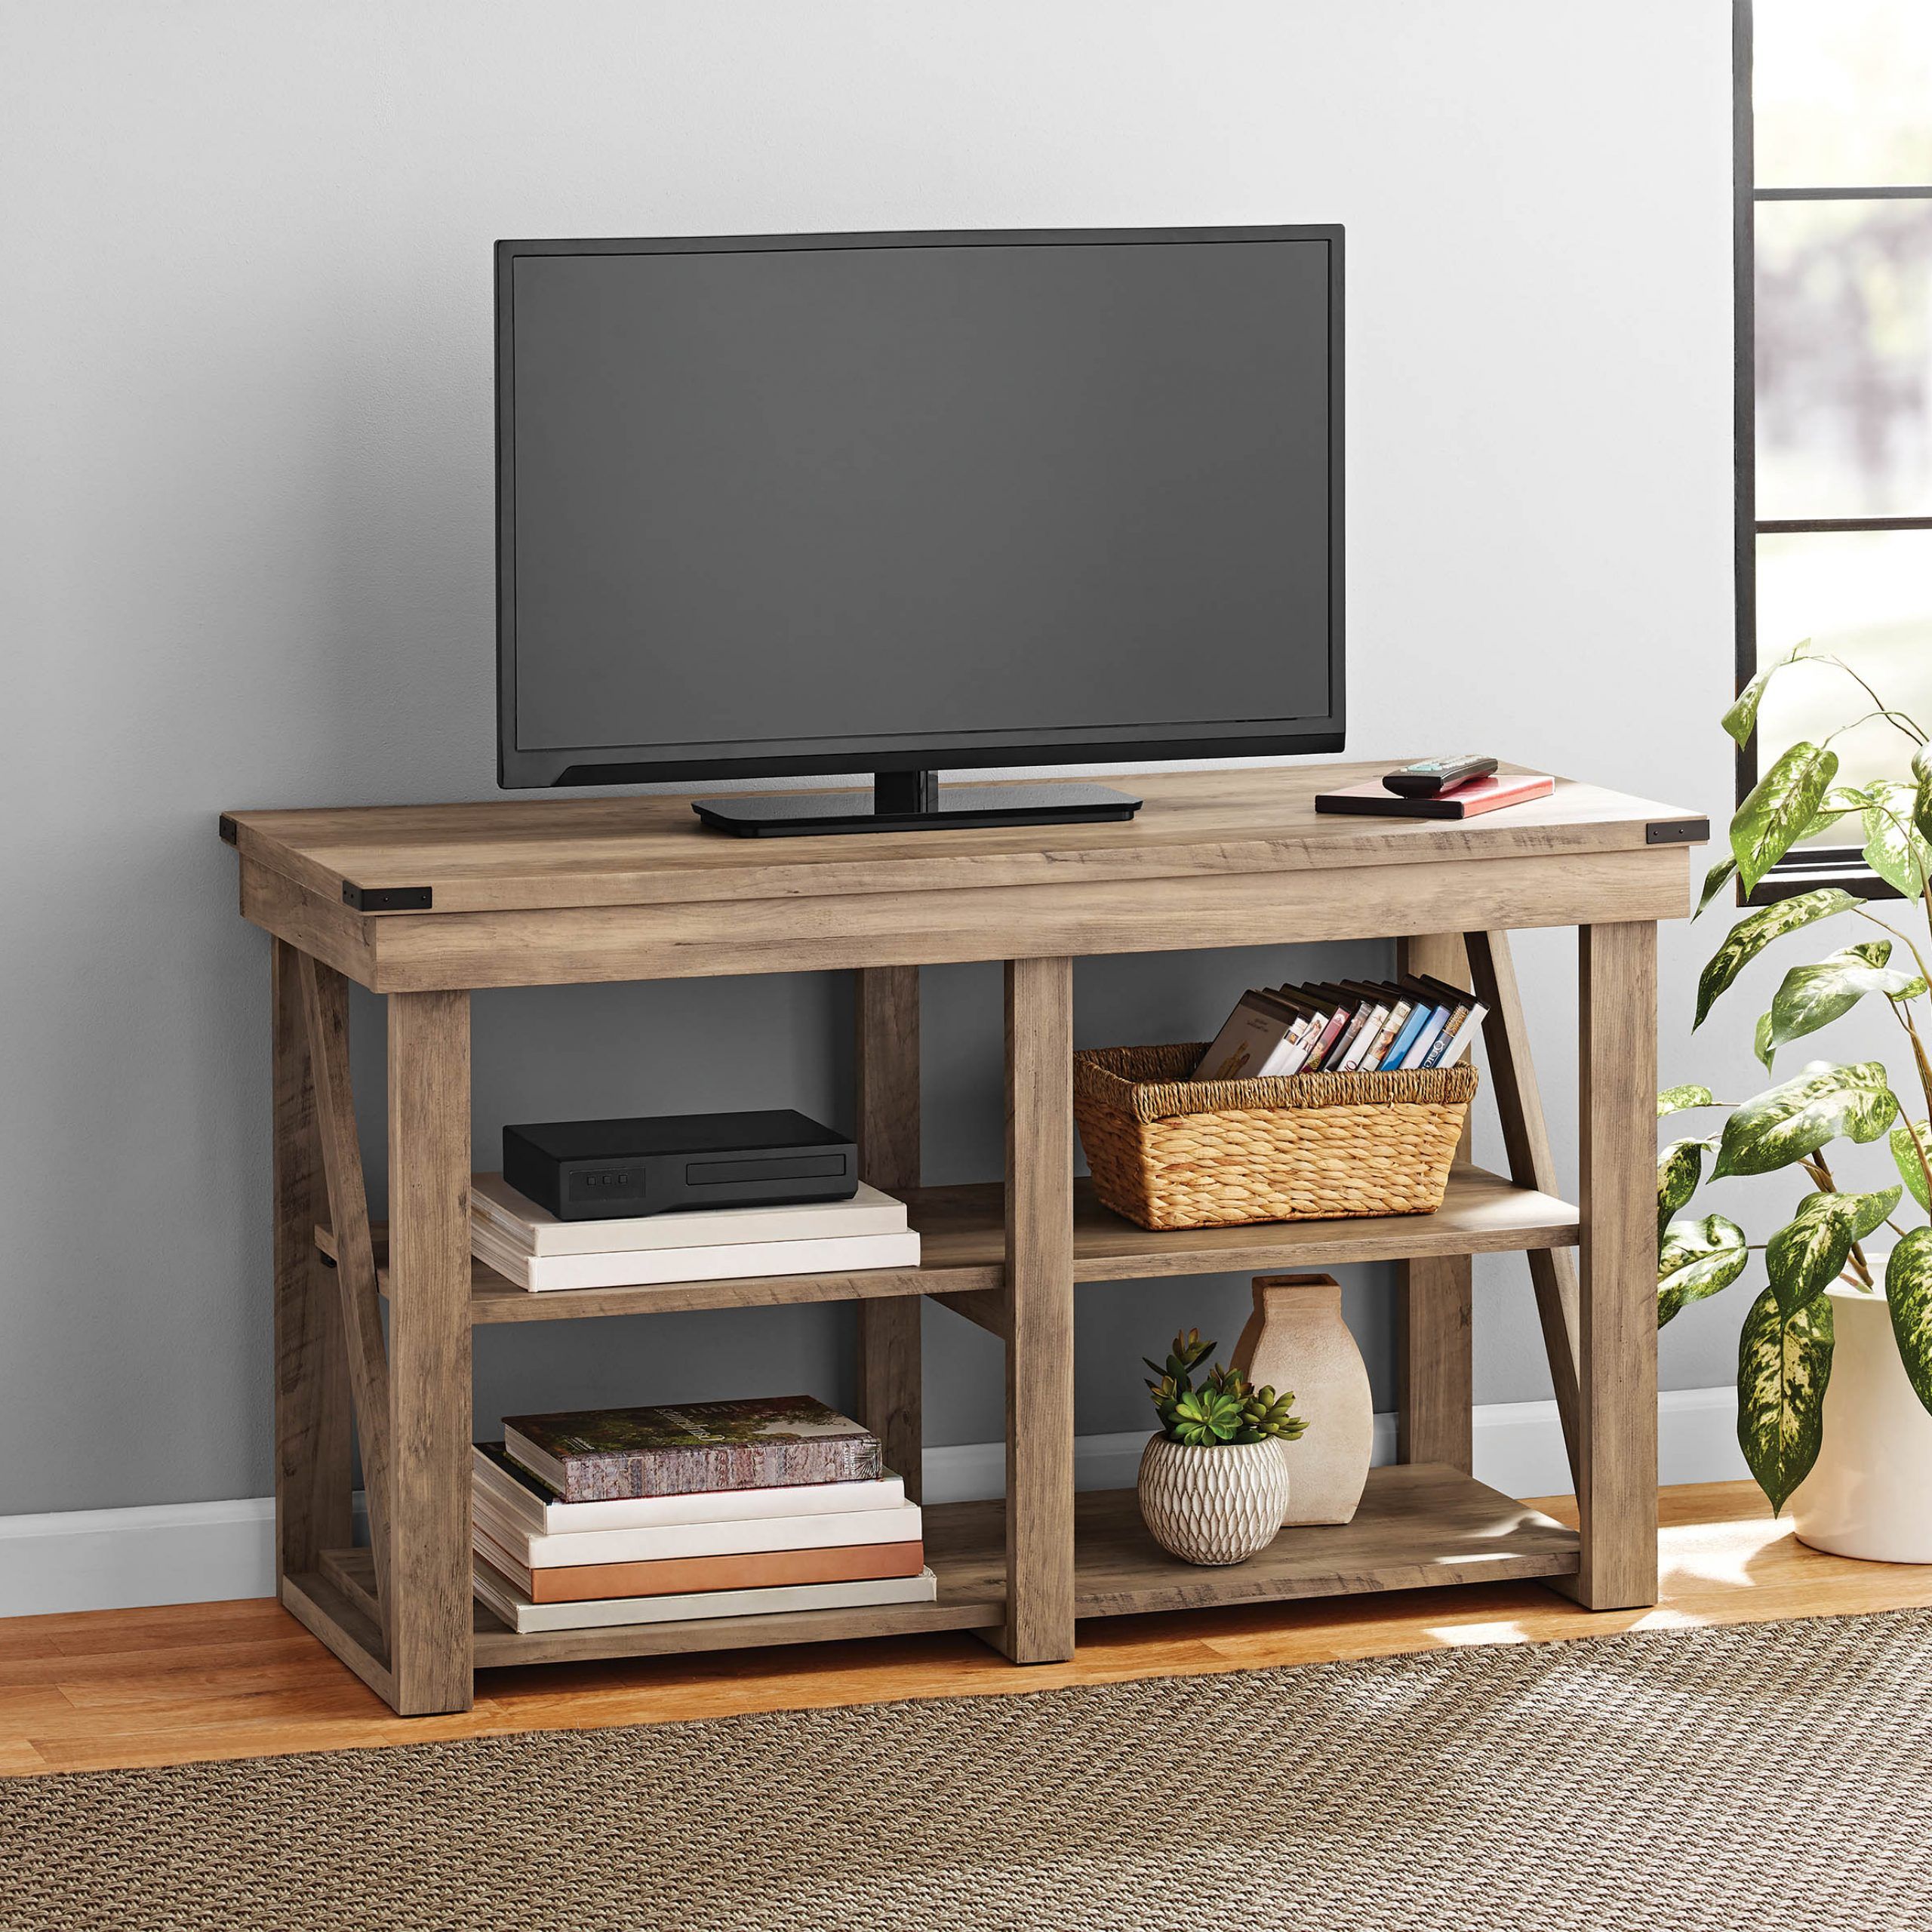 Mainstays Lawson Tv Stand For Tvs Up To 55", Rustic Oak For Sahika Tv Stands For Tvs Up To 55" (Gallery 2 of 20)